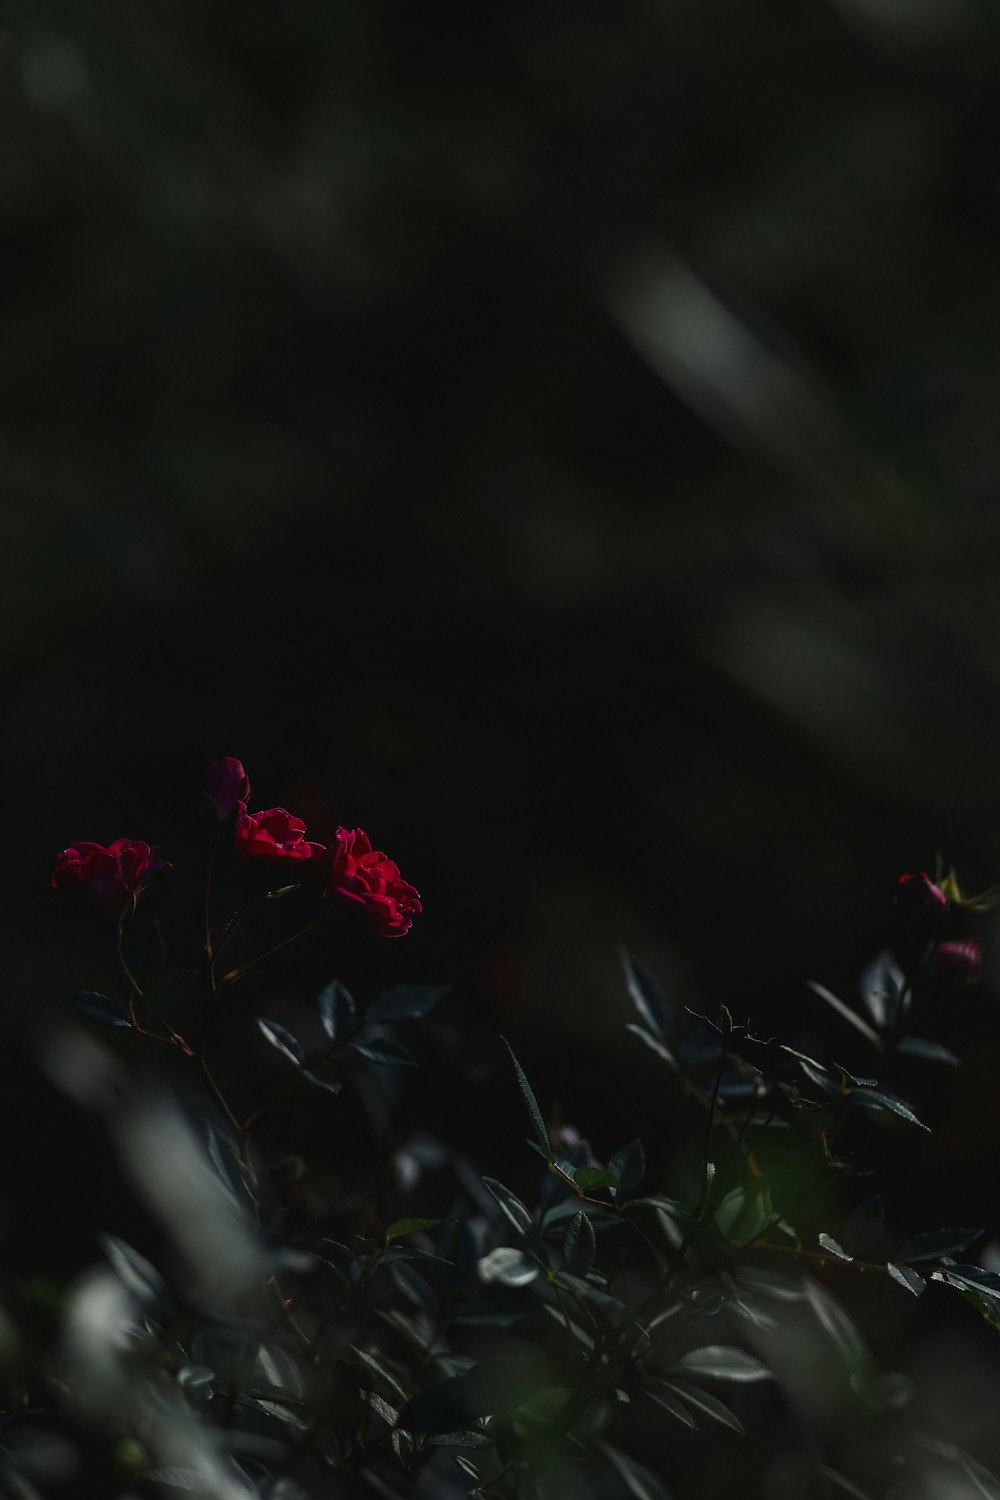 some red flowers in a bush with green leaves